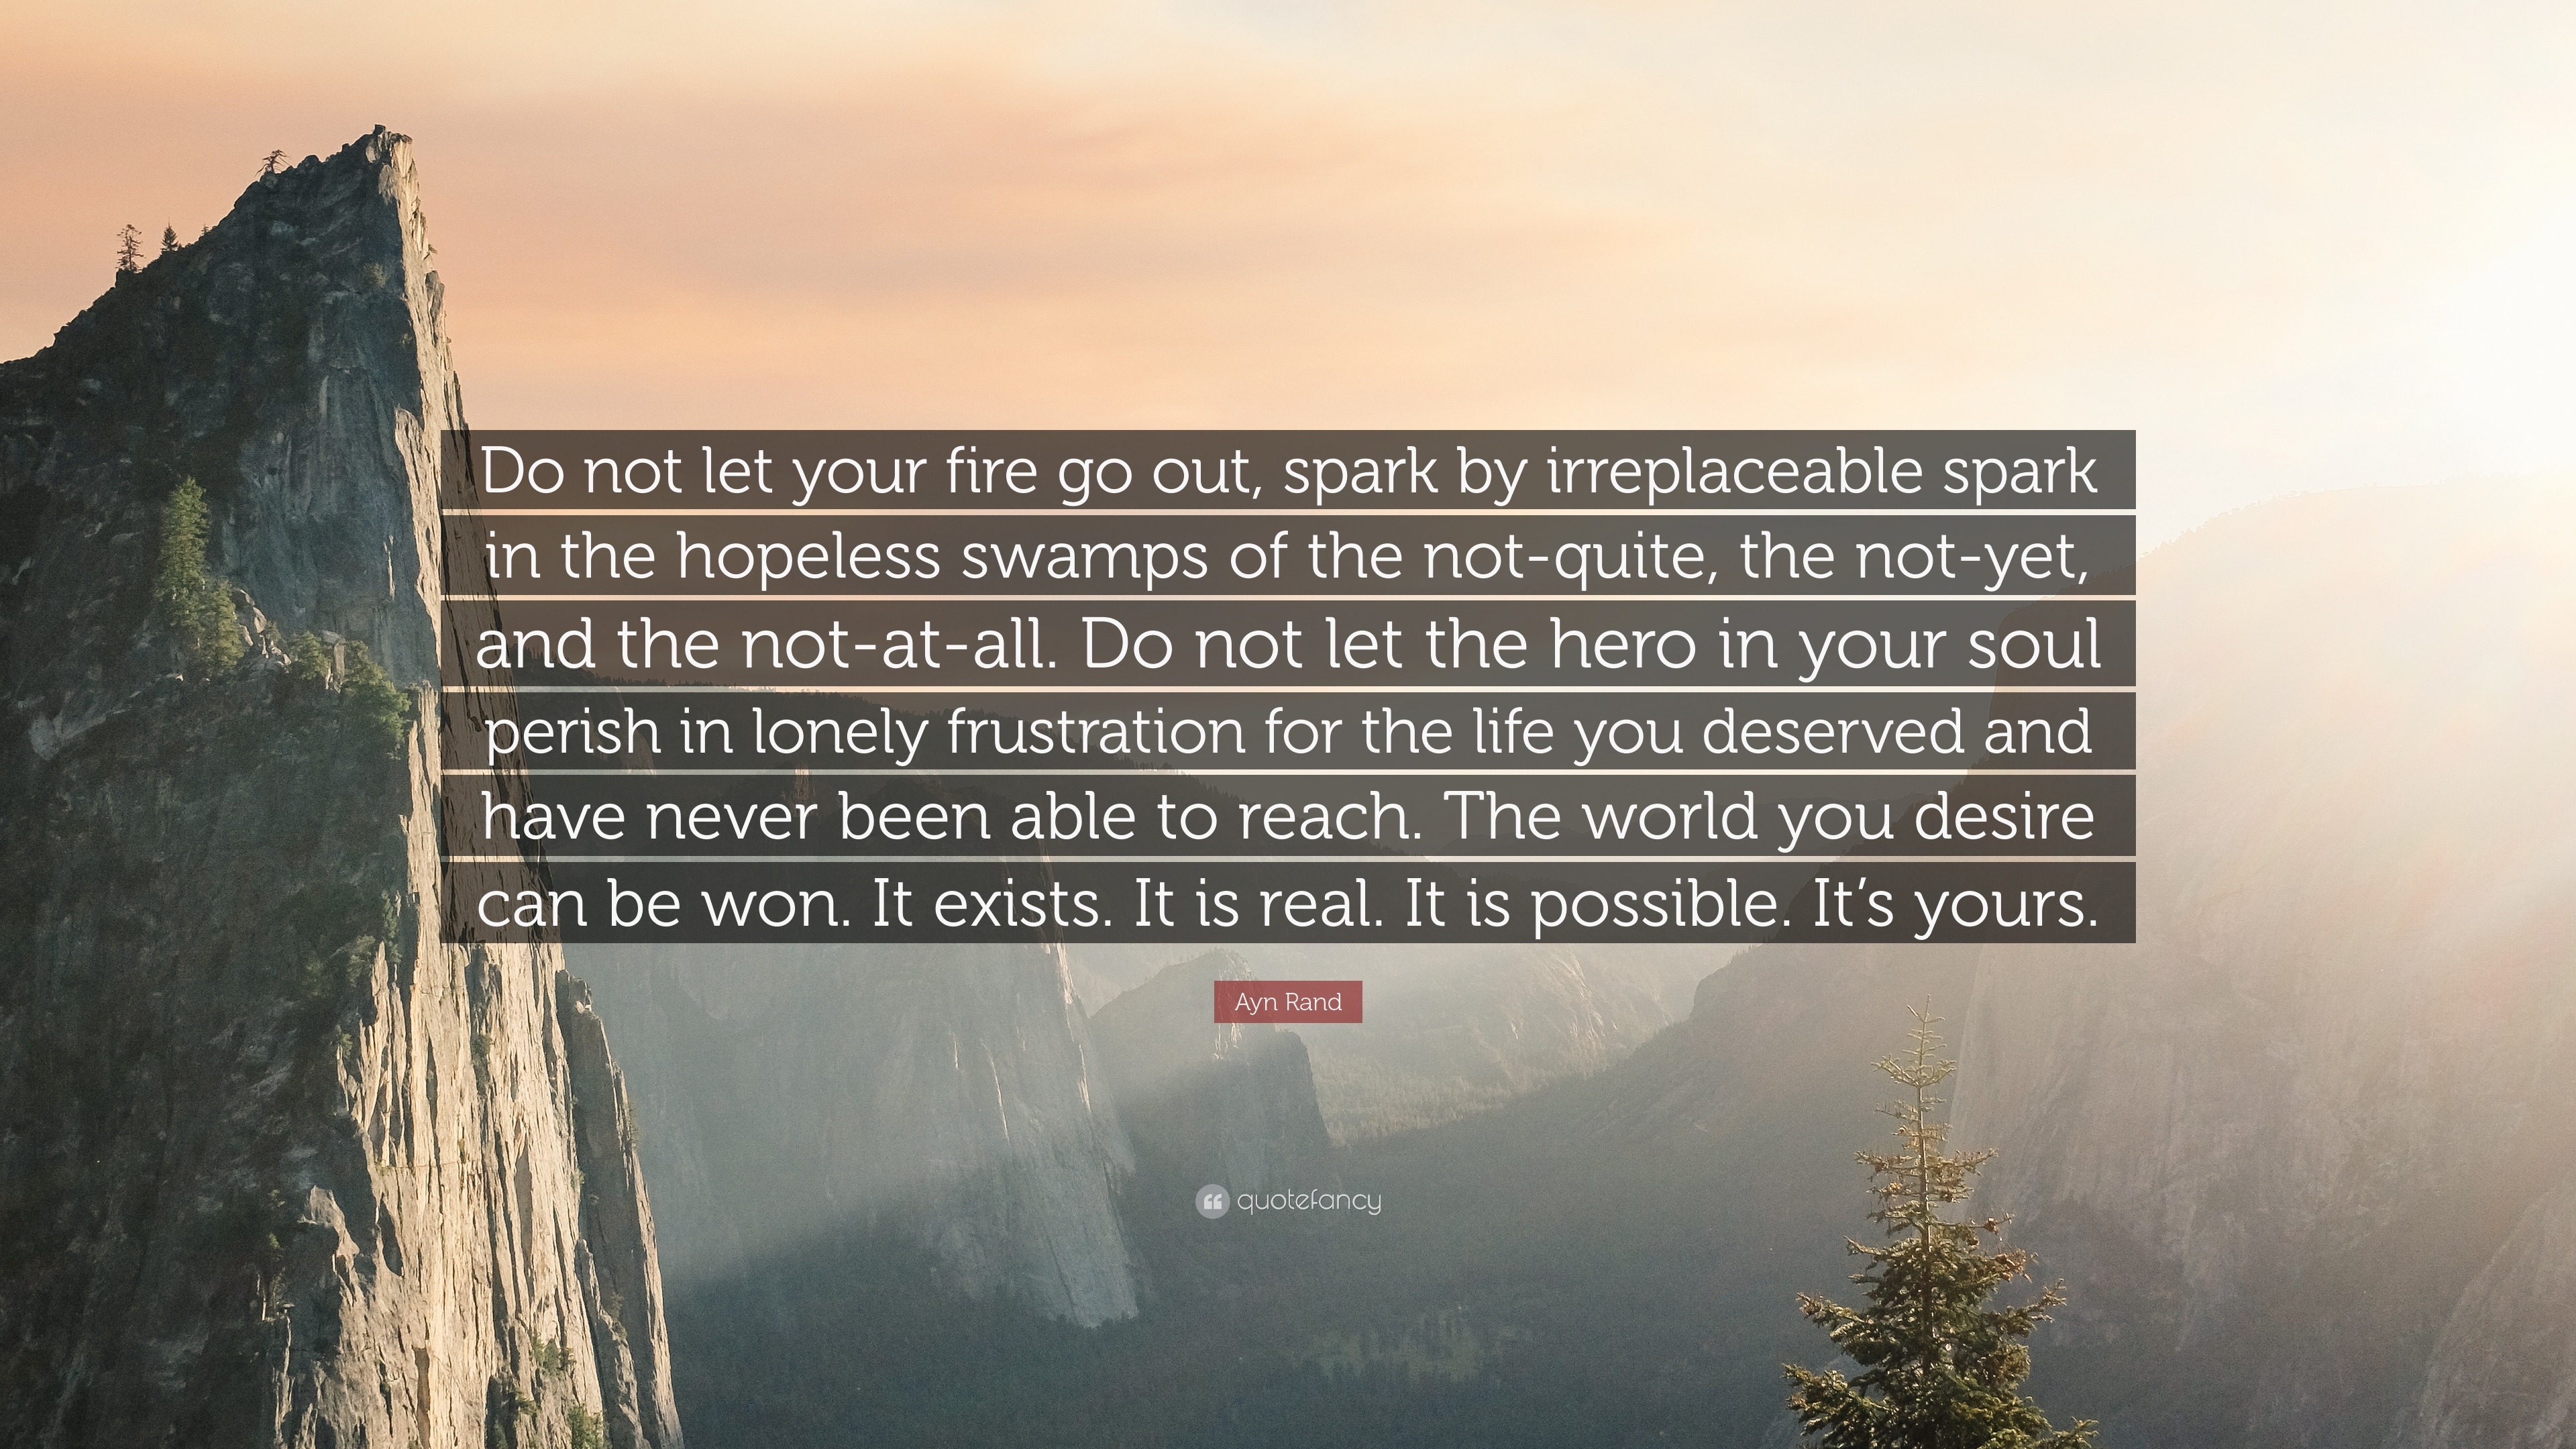 36147-Ayn-Rand-Quote-Do-not-let-your-fire-go-out-spark-by-irreplaceable.jpg